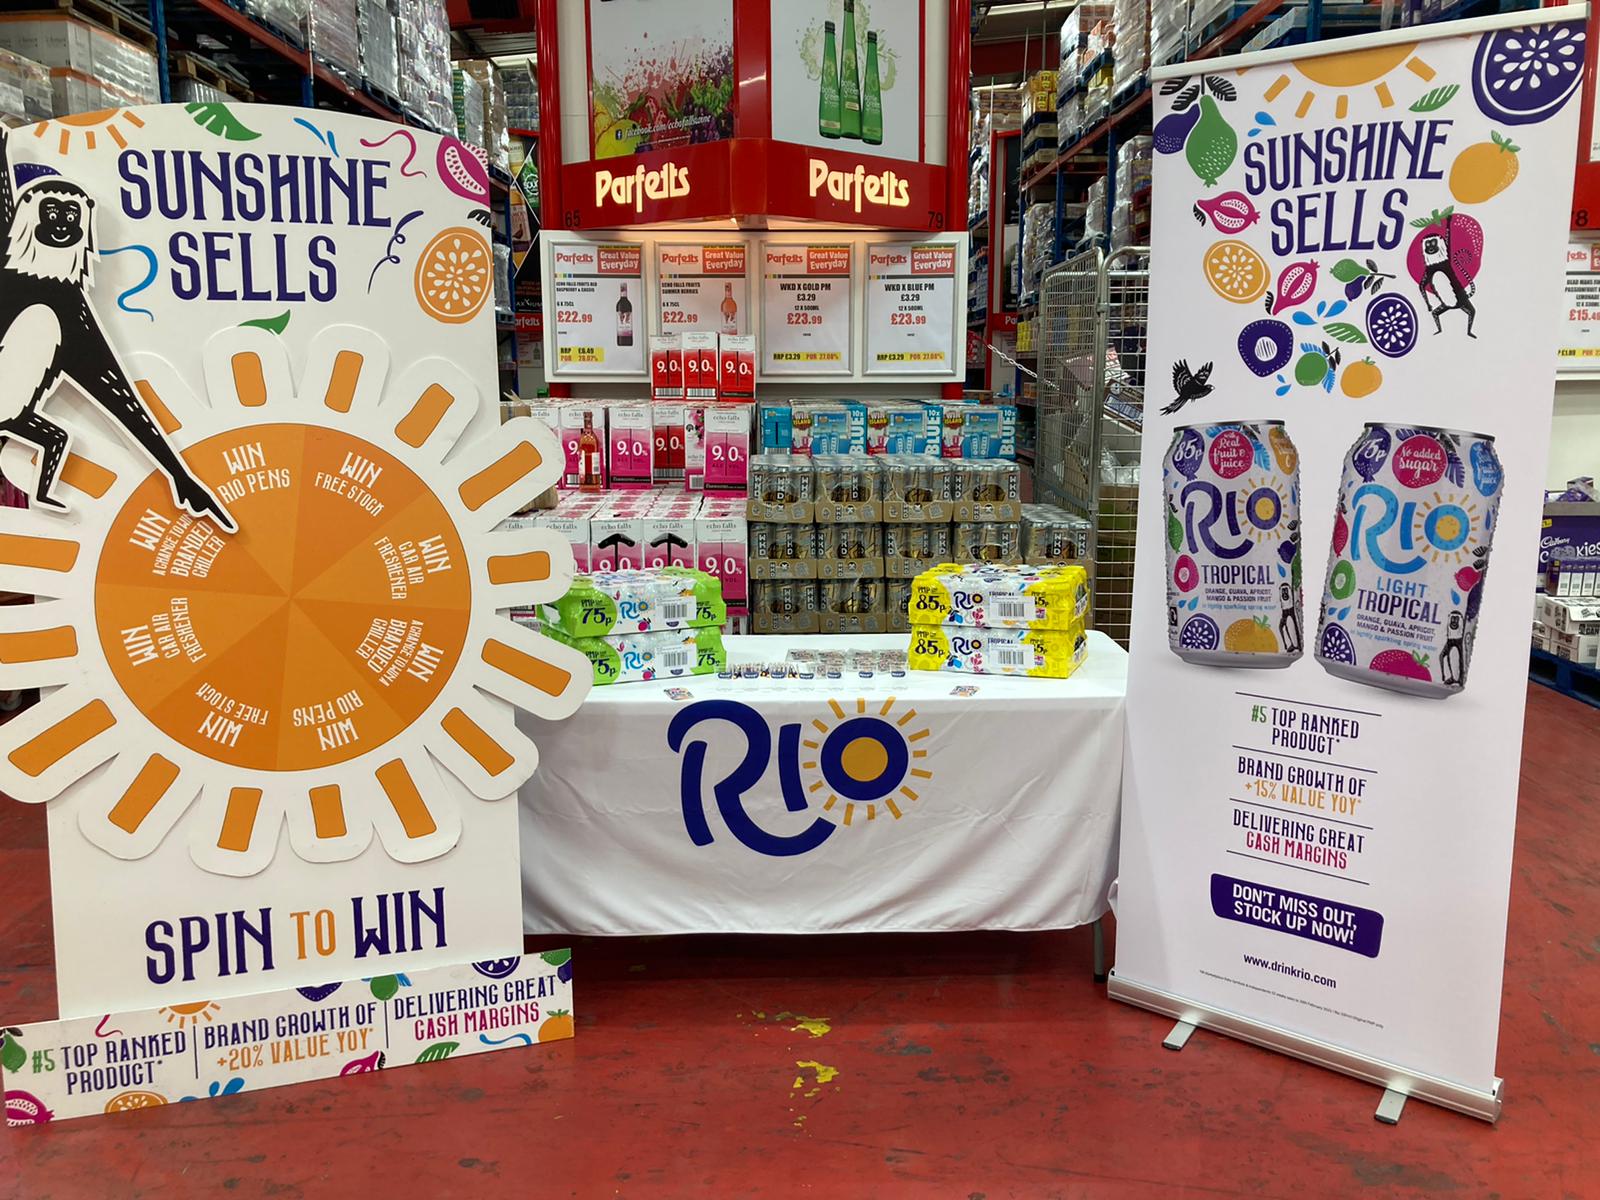 See more super sunshine sales with Rio this summer